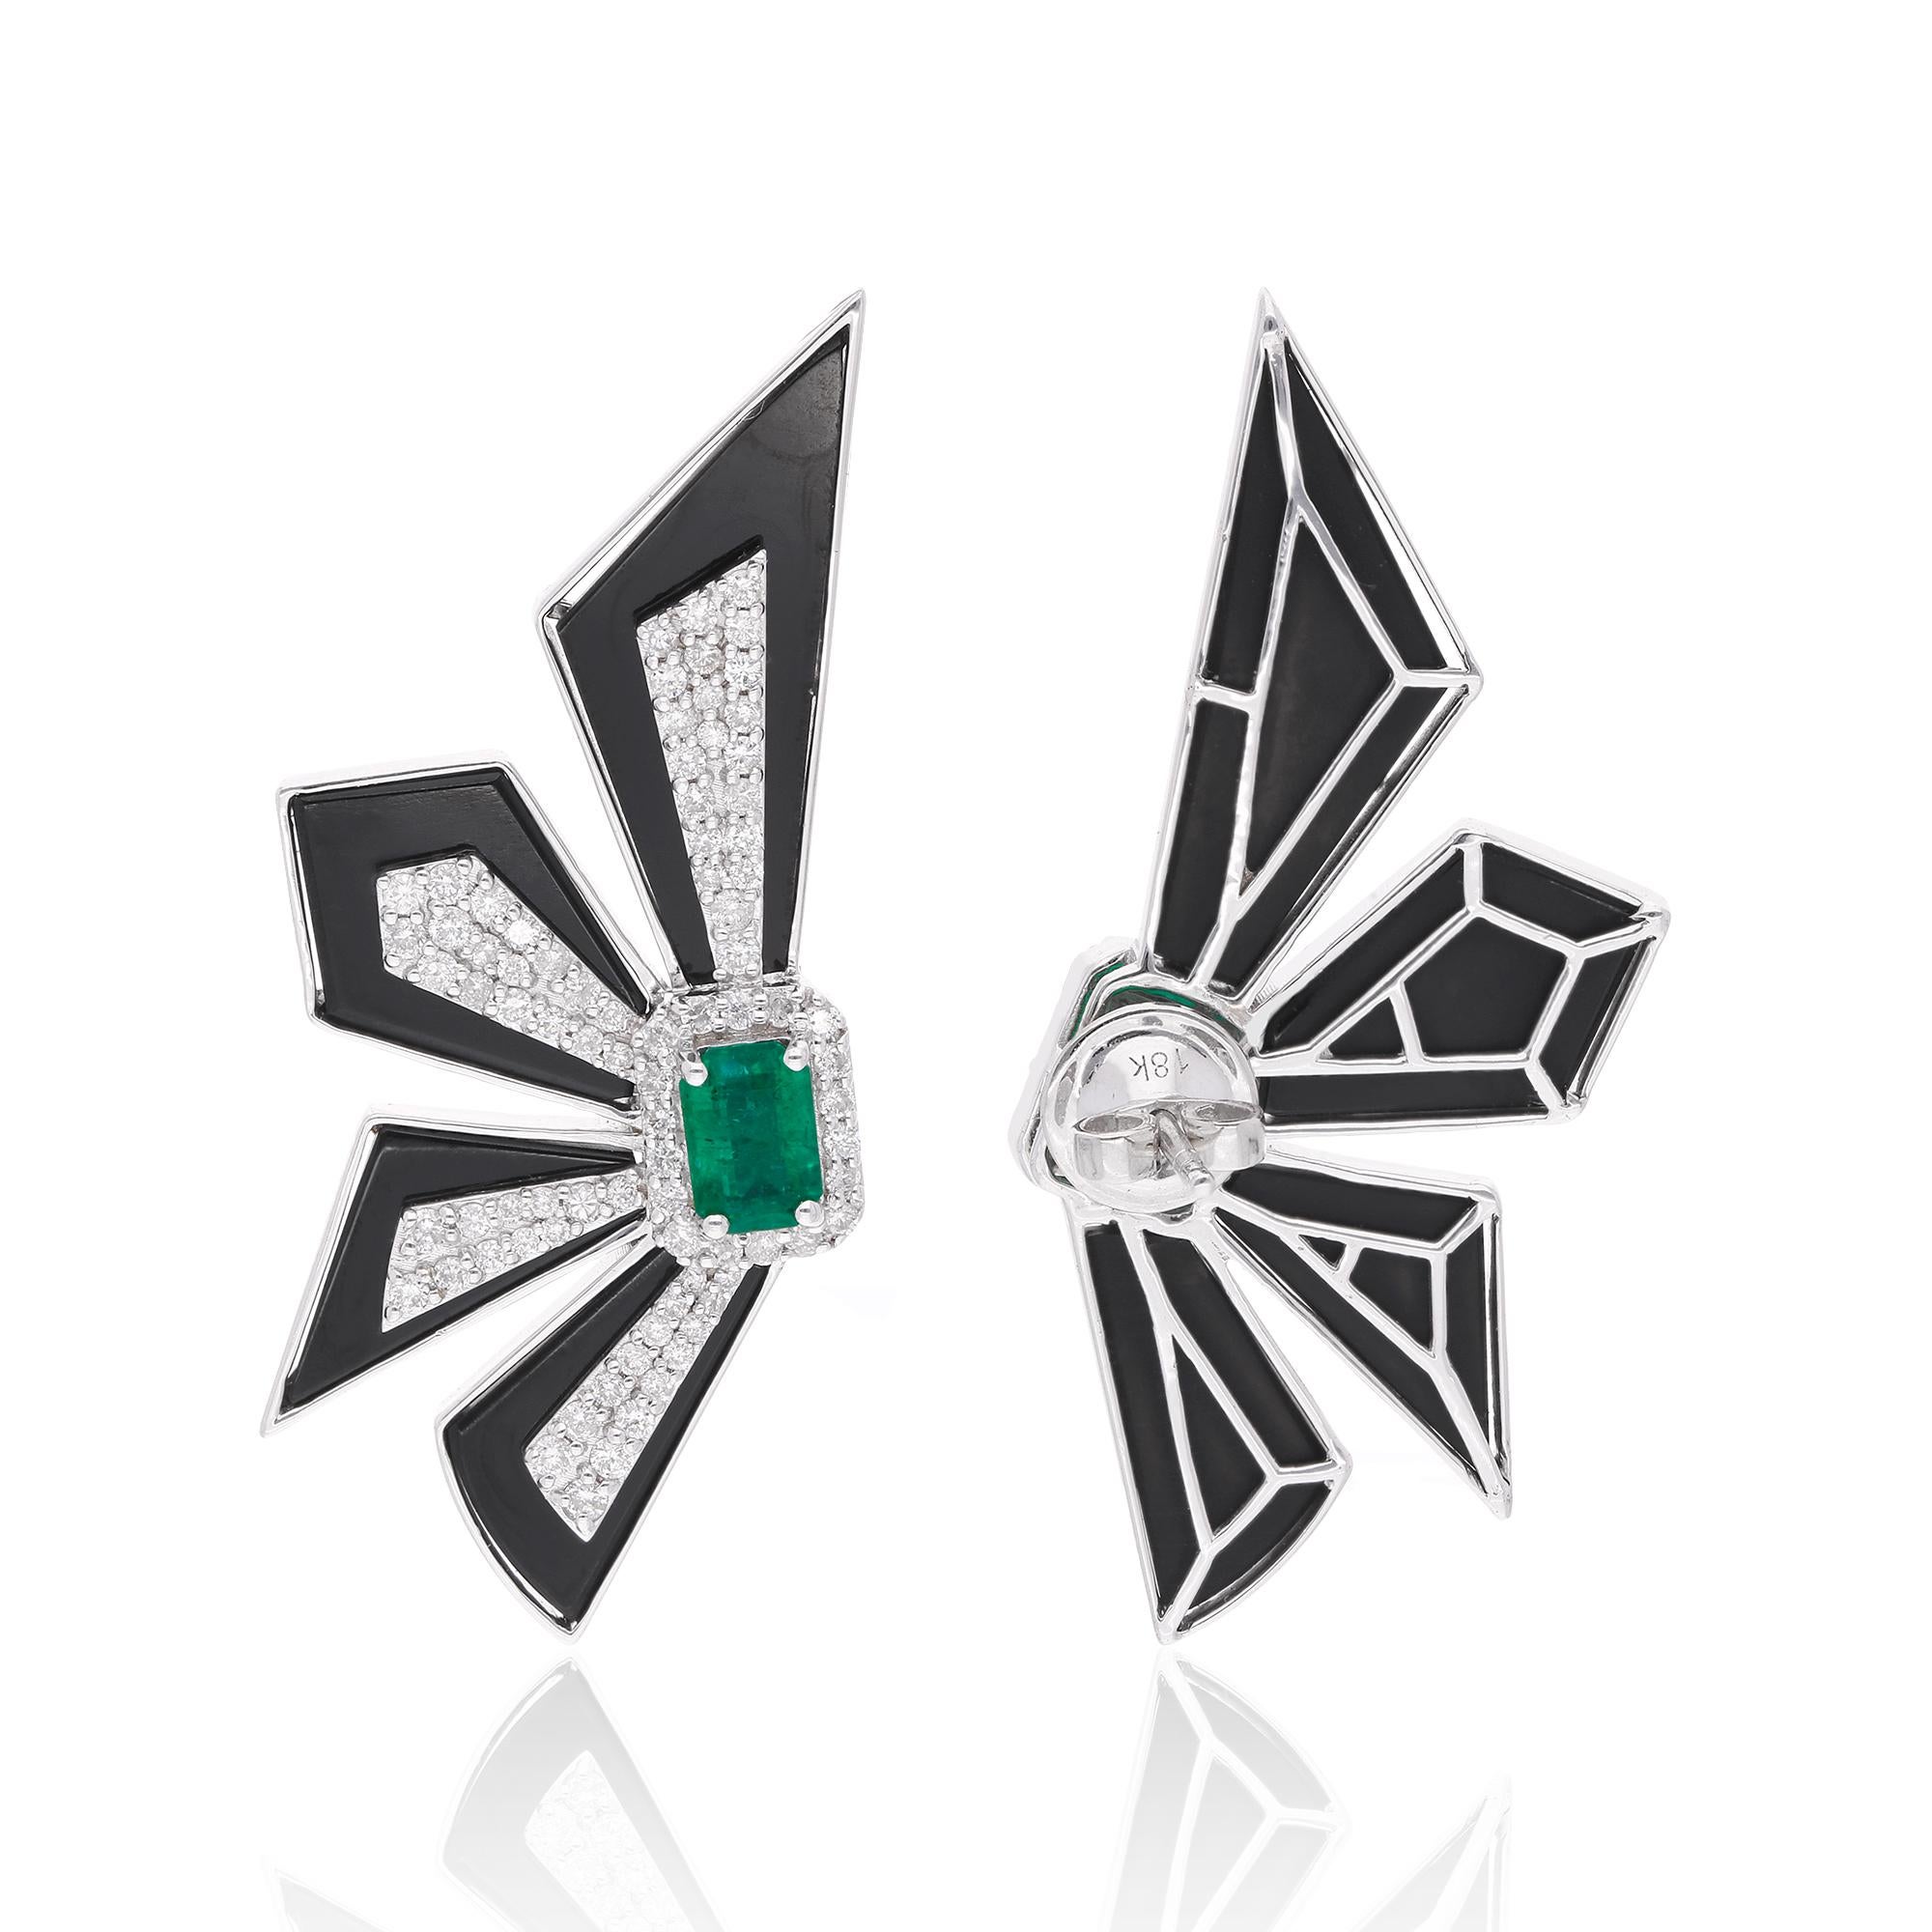 These Dainty Diamond Stud Earrings with 1.15 ct. Genuine Diamonds & 1.26 ct. Zambian Emerald are a promise of perfection and purity. These earrings are set in 18k Solid White Gold. You can choose these earrings in 10k/14k/18k Rose Gold/Yellow